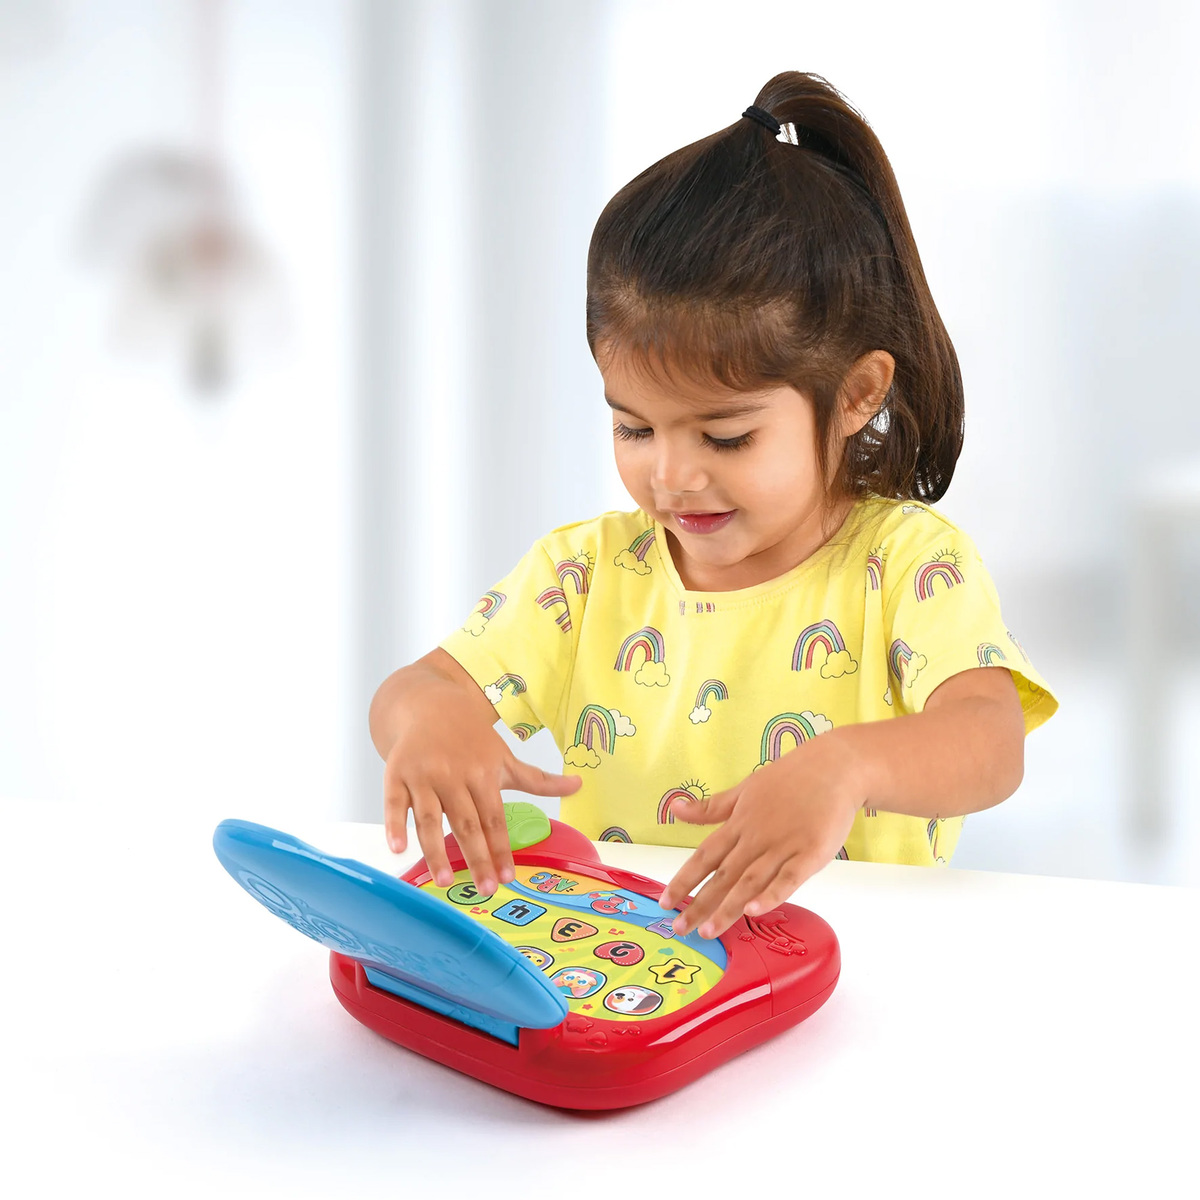 Playgo Press To Learn Laptop, 2597